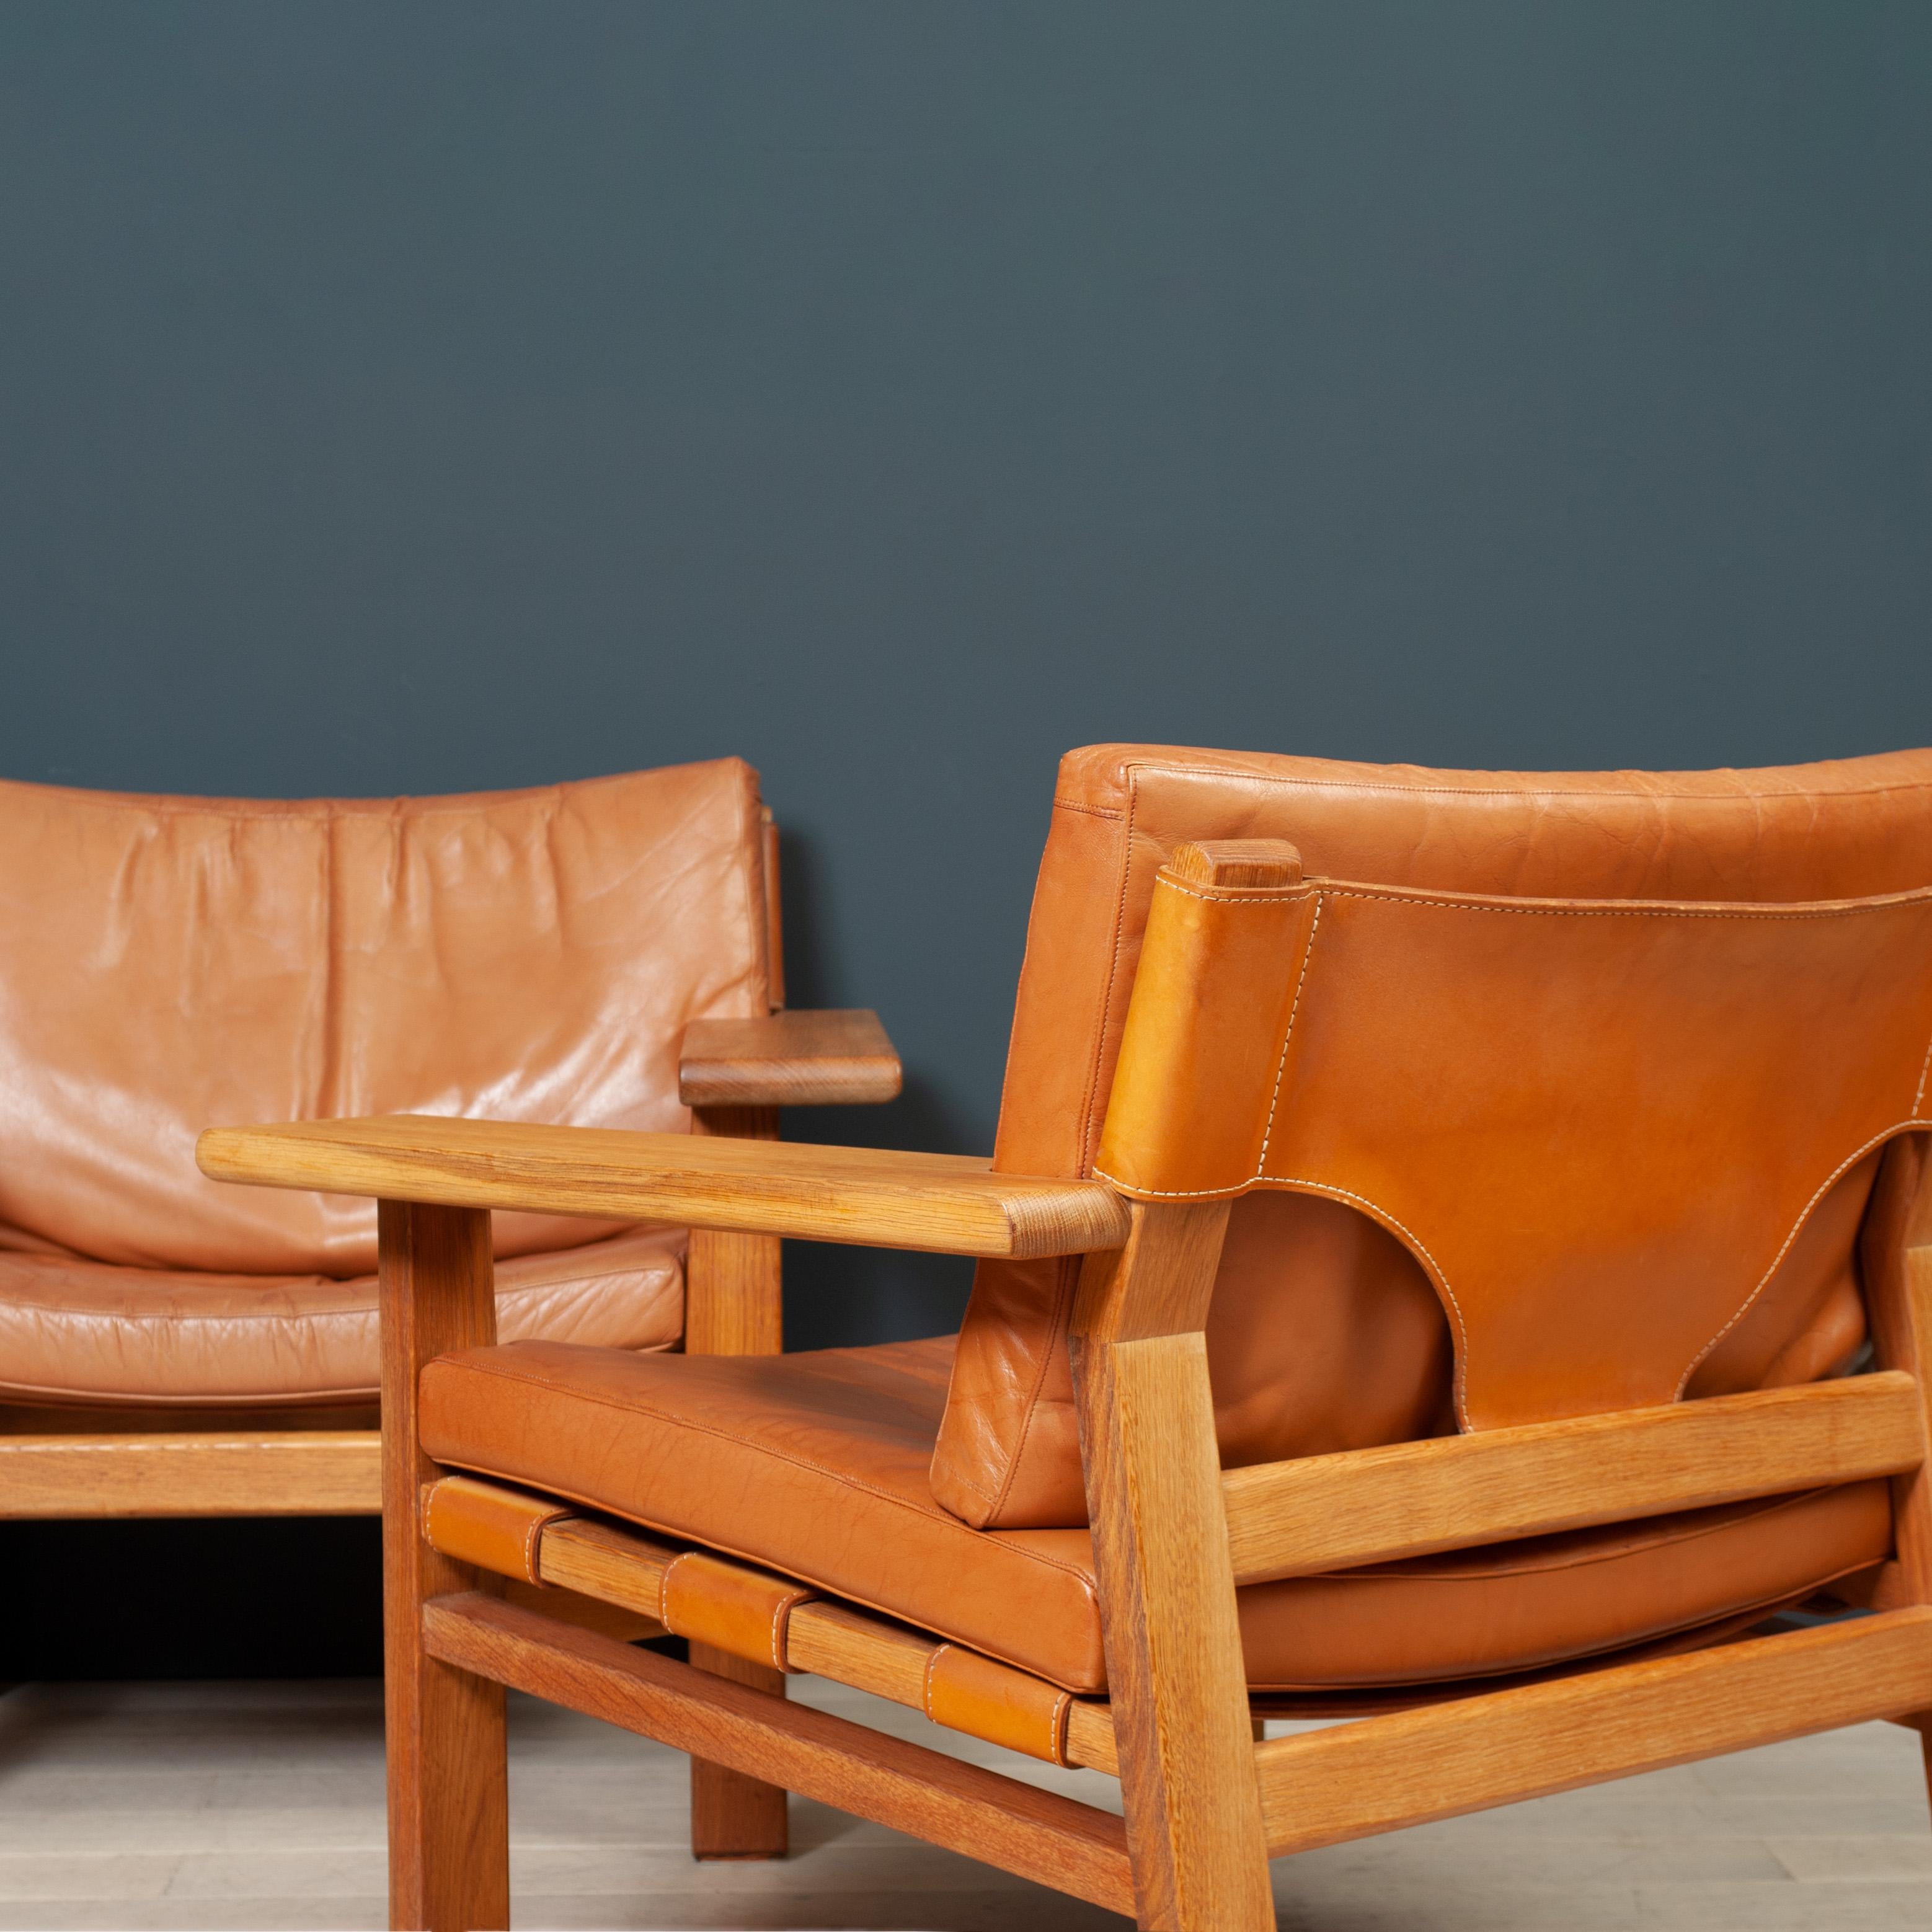 Hunter Spanish Lounge chairs by K.S Mobler circa 1960 - of the same period and in the manner of Borge Mogensen Spanish chairs - a nice alternative. Wonderful oversized oak arms with tan saddle leather sling and leather upholstered cushions. An